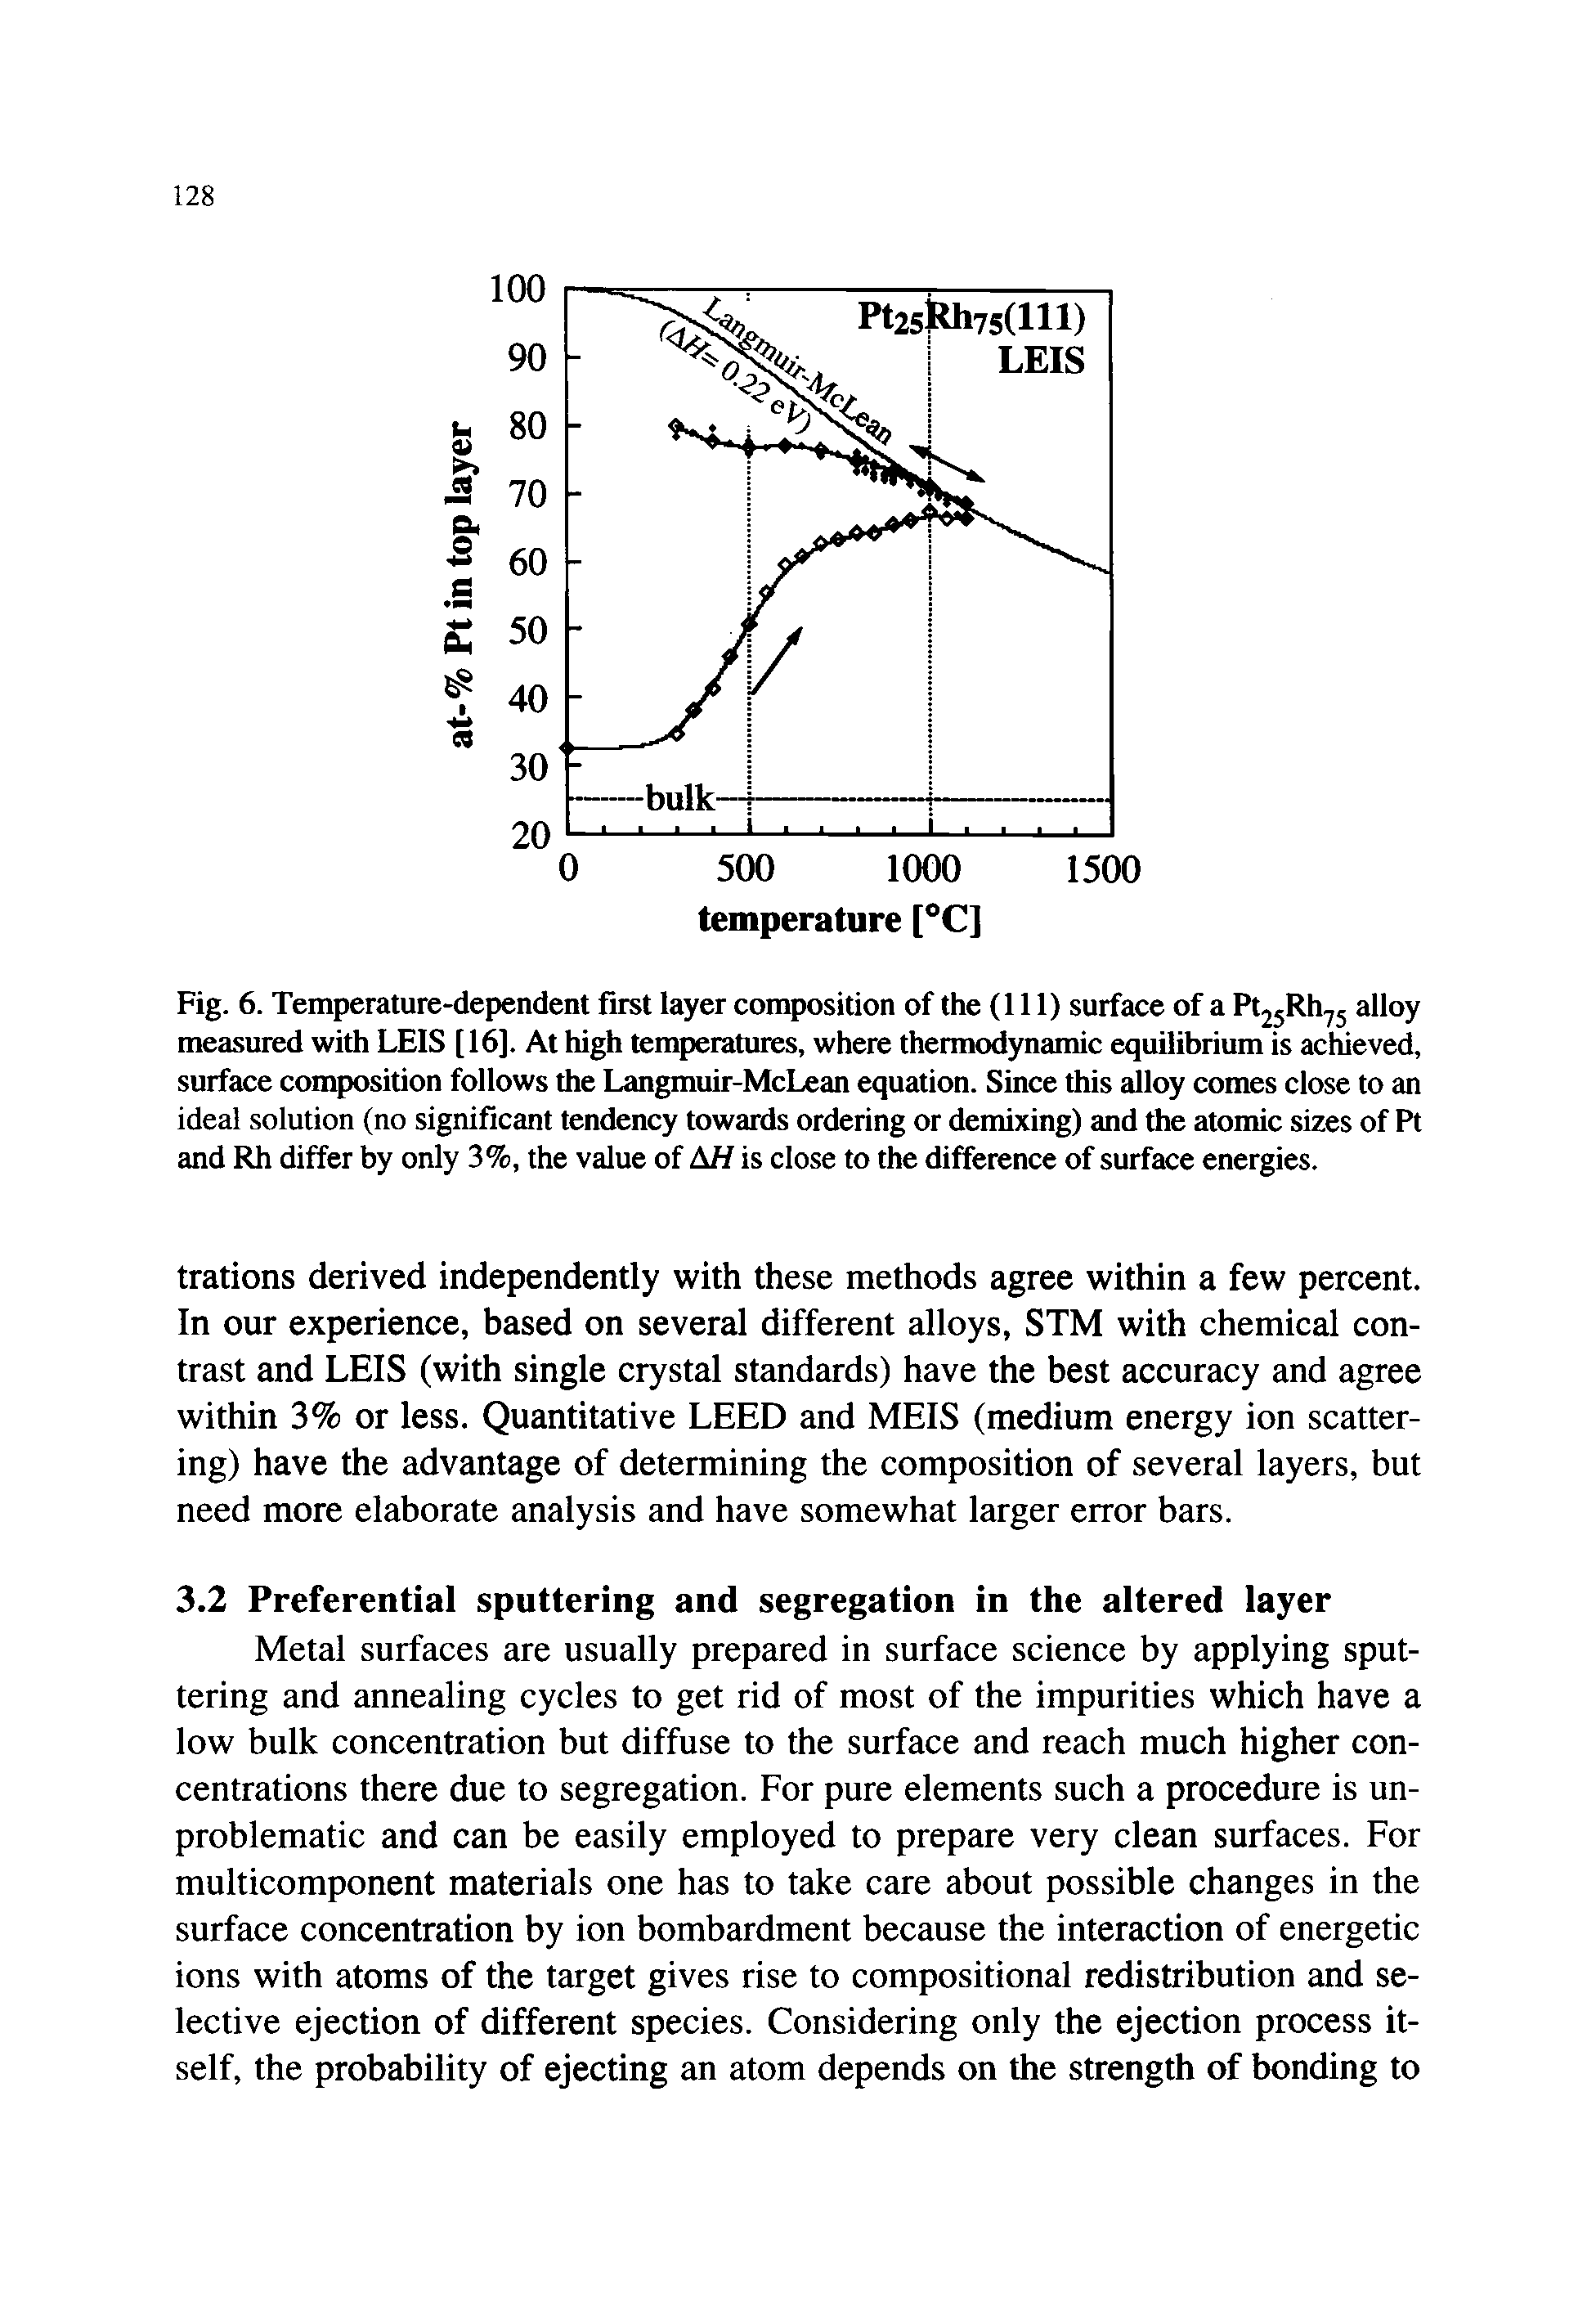 Fig. 6. Temperature-dependent first layer composition of the (111) surface of a PtjjRh j alloy measured with LEIS [16]. At high temperatures, where thermodynamic equilibrium is achieved, surface composition follows the Langmuir-McLean equation. Since this alloy comes close to an ideal solution (no significant tendency towards ordering or demixing) and the atomic sizes of Pt and Rh differ by only 3%, the value of AH is close to the difference of surface energies.